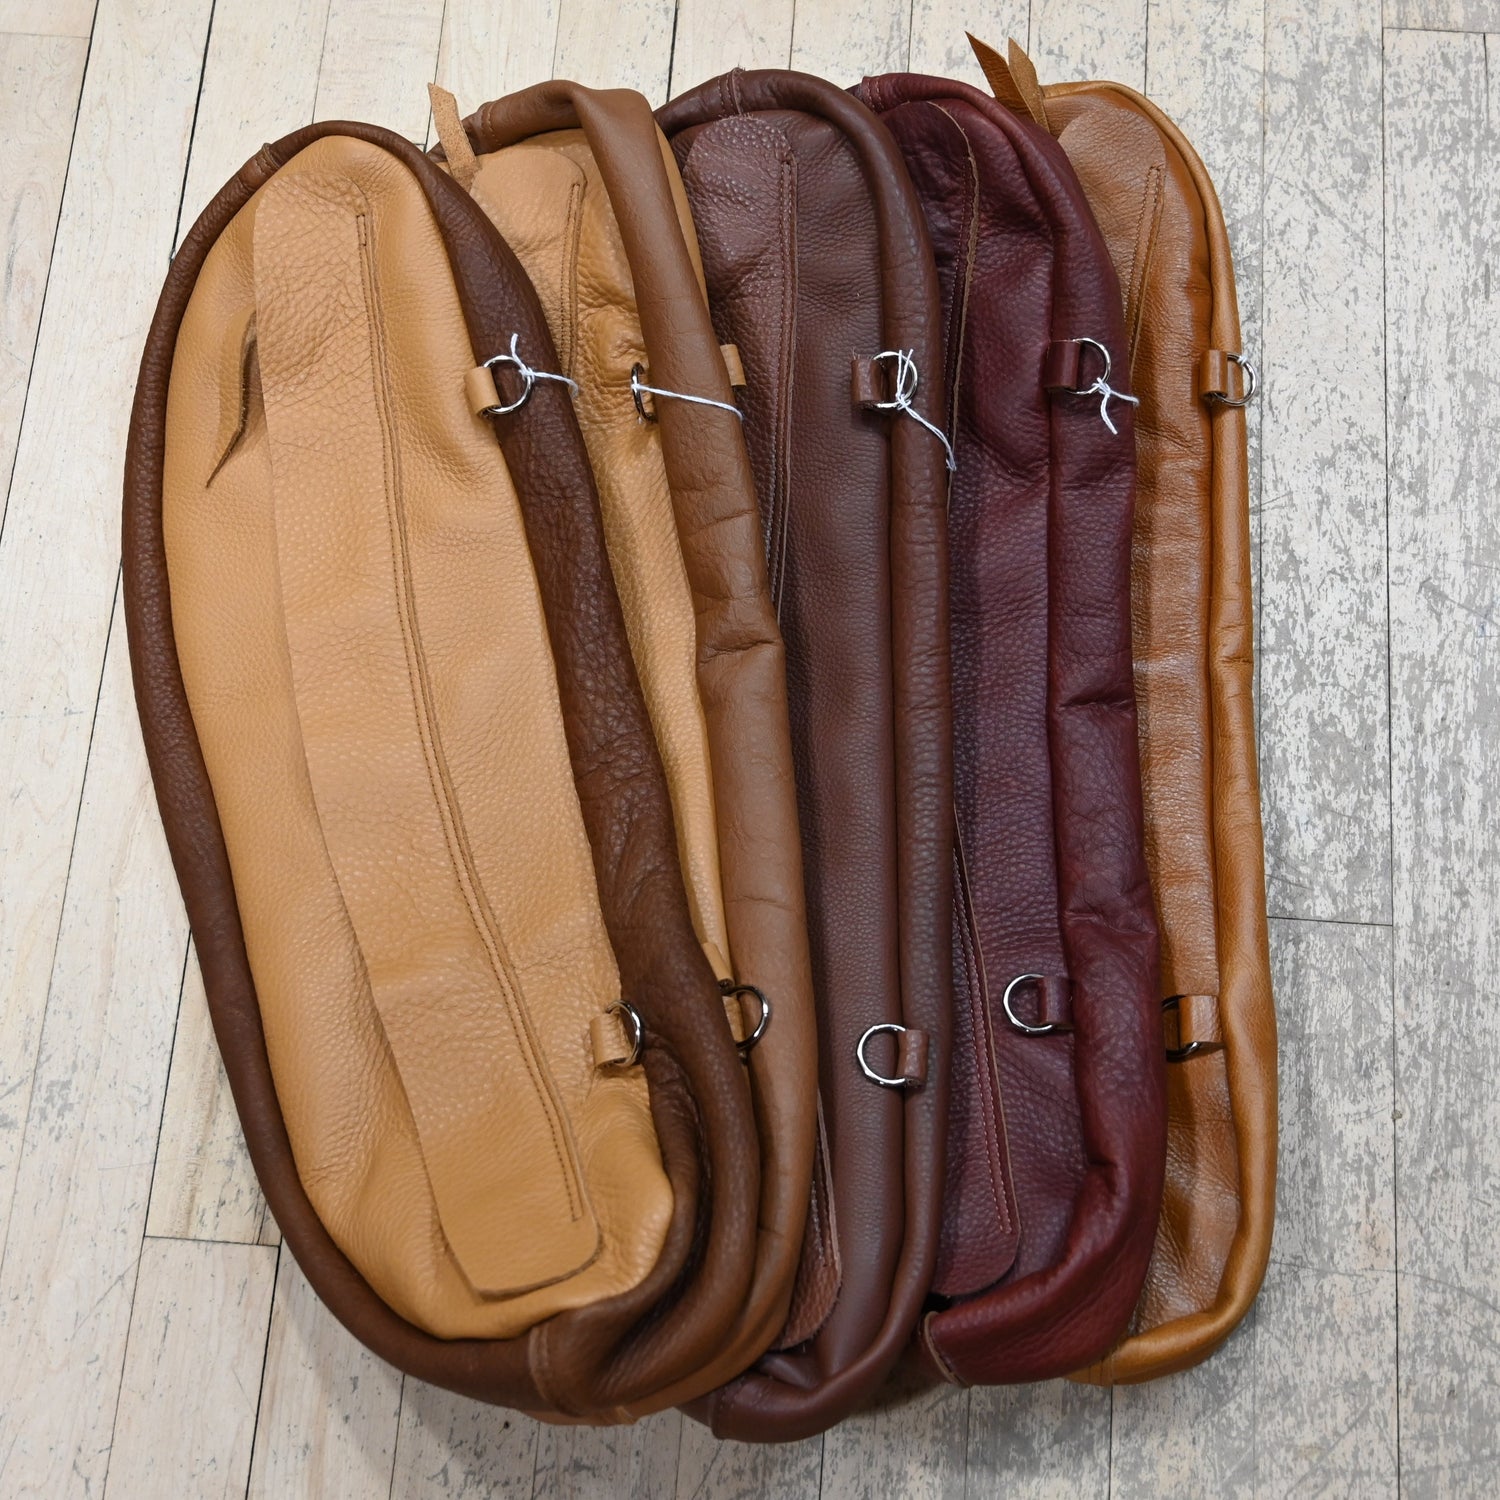 Cantle Bag color options